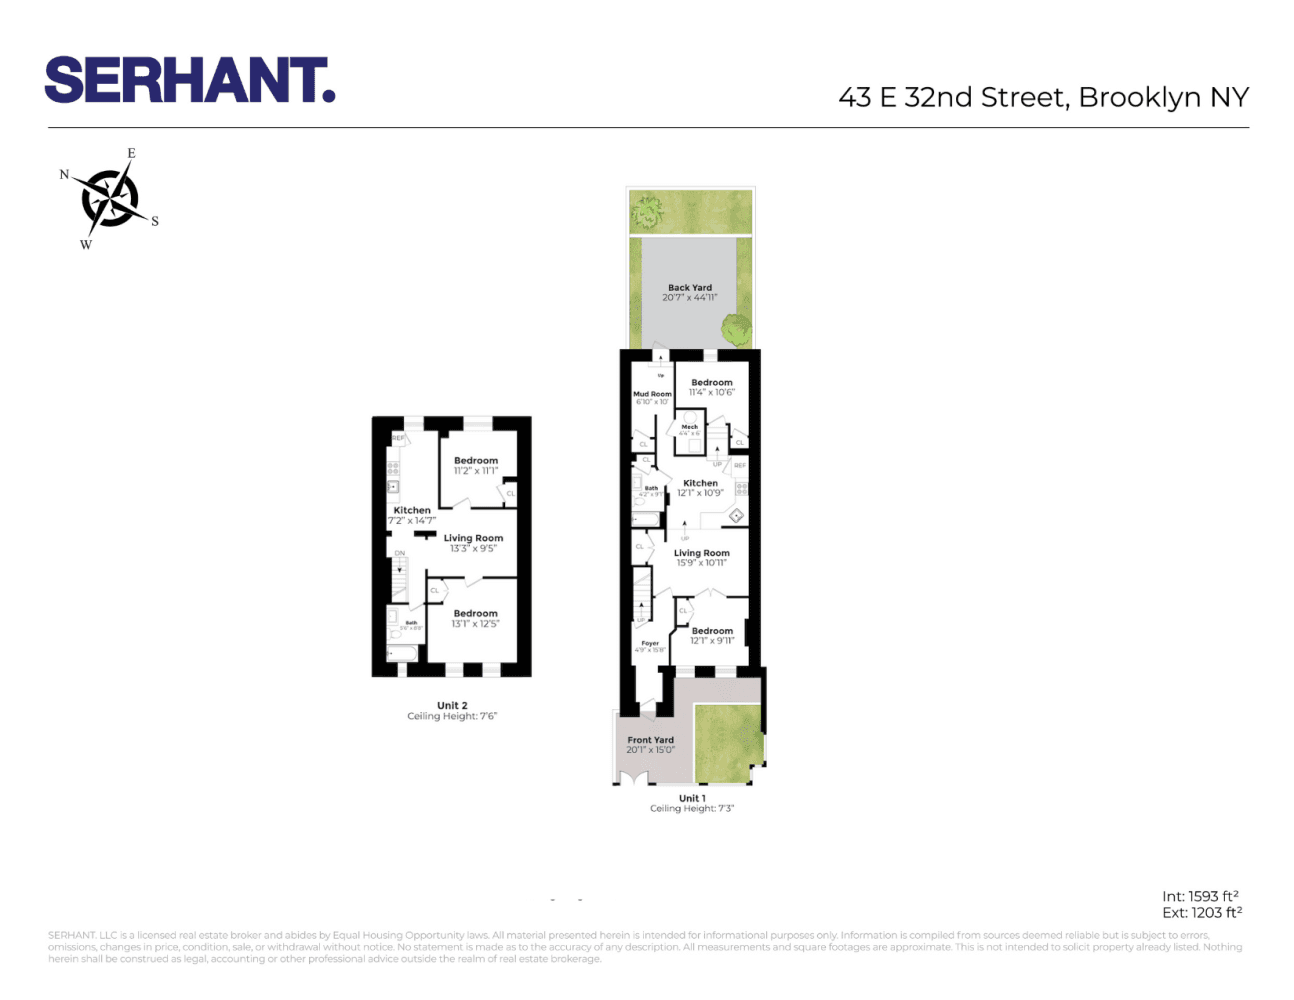 FLOOR PLAN COMING SOON ! CONTACT ME FOR A VIDEO !